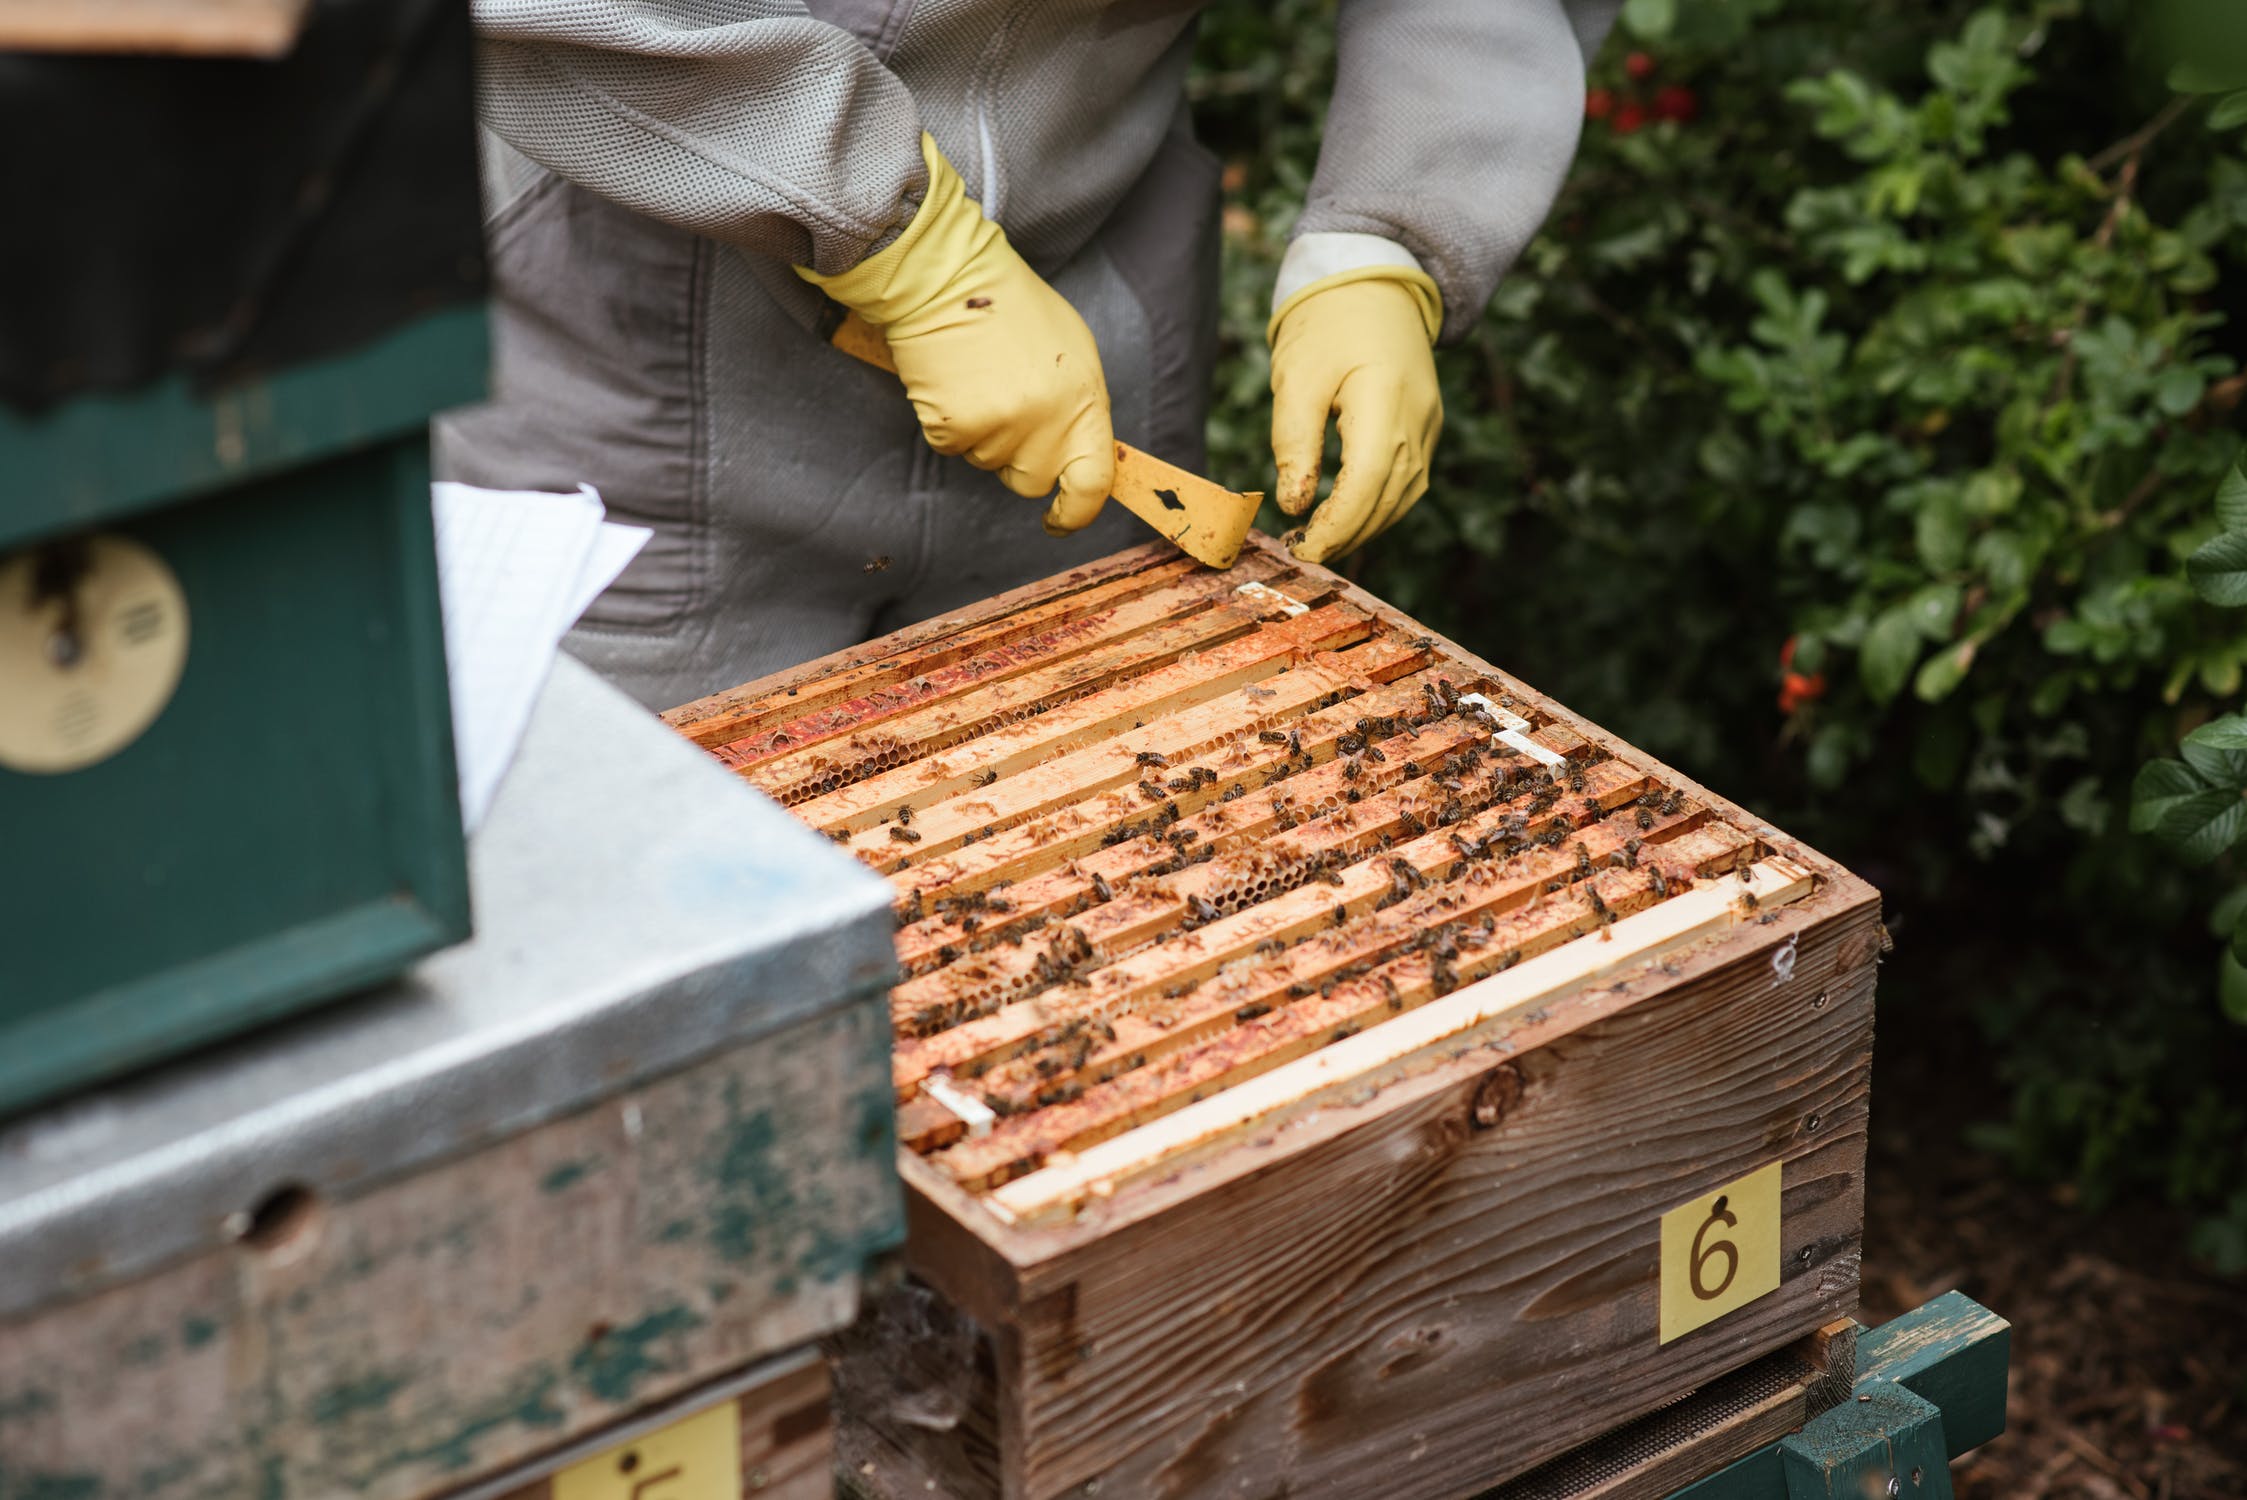 beekeeper removing a brood frame from a hive box using a hive tool